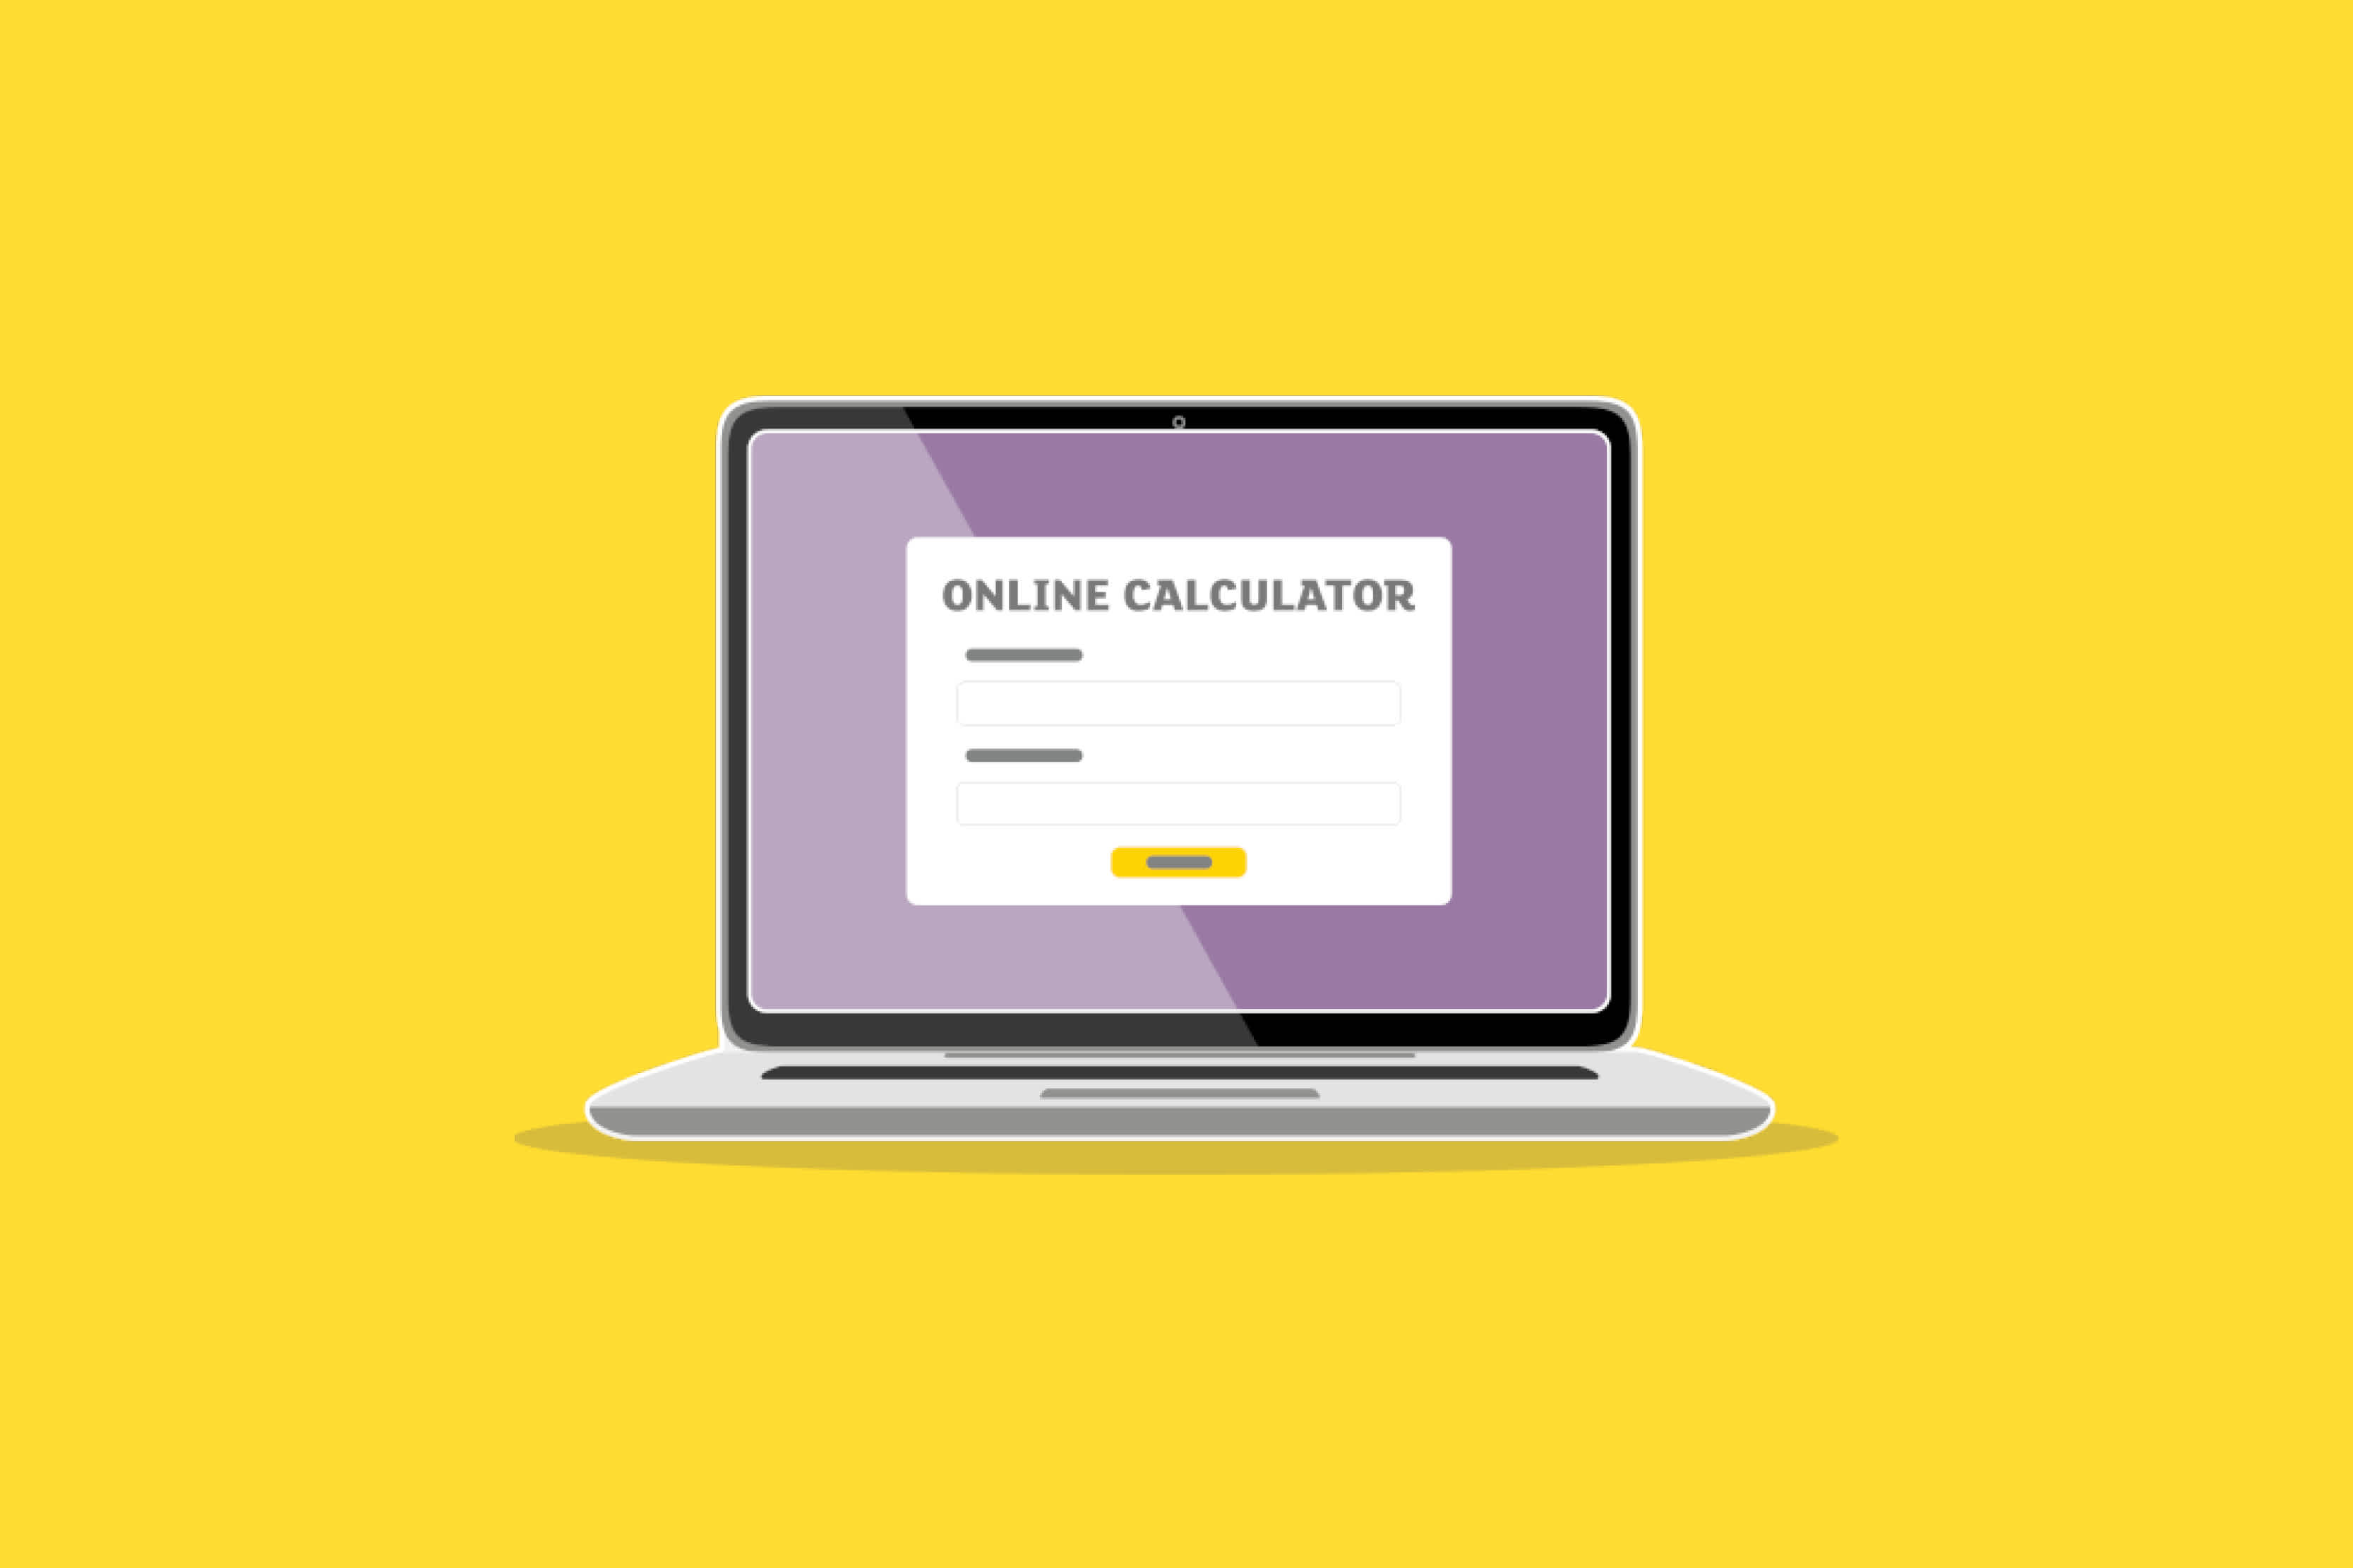 You can use an online calculator to estimate your sum insured.